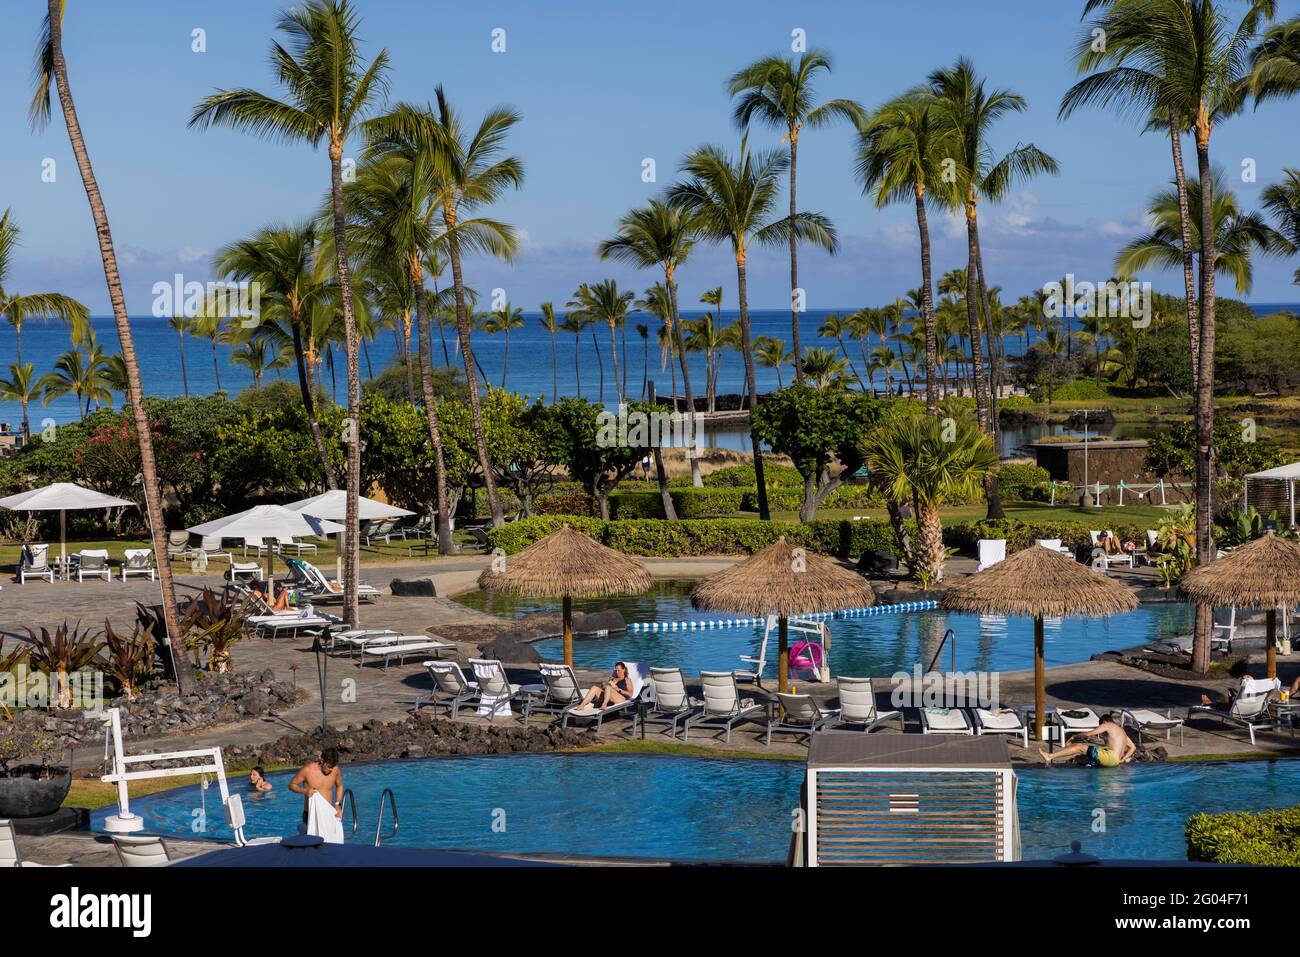 Waikoloa, USA. 24th May, 2021. Tourist begin travel to the big island of Hawaii in a post-pandemic world. Hawaii is now allowing travelers to the island chain as long as they are fully vaccinated and have passed a Covid-19 test within 72 hours of their trip. Waikoloa Beach Marriott Resort. 5/23/2021 Waikoloa Beach, Hawaii, USA (Photo by Ted Soqui/SIPA USA) Credit: Sipa USA/Alamy Live News Stock Photo